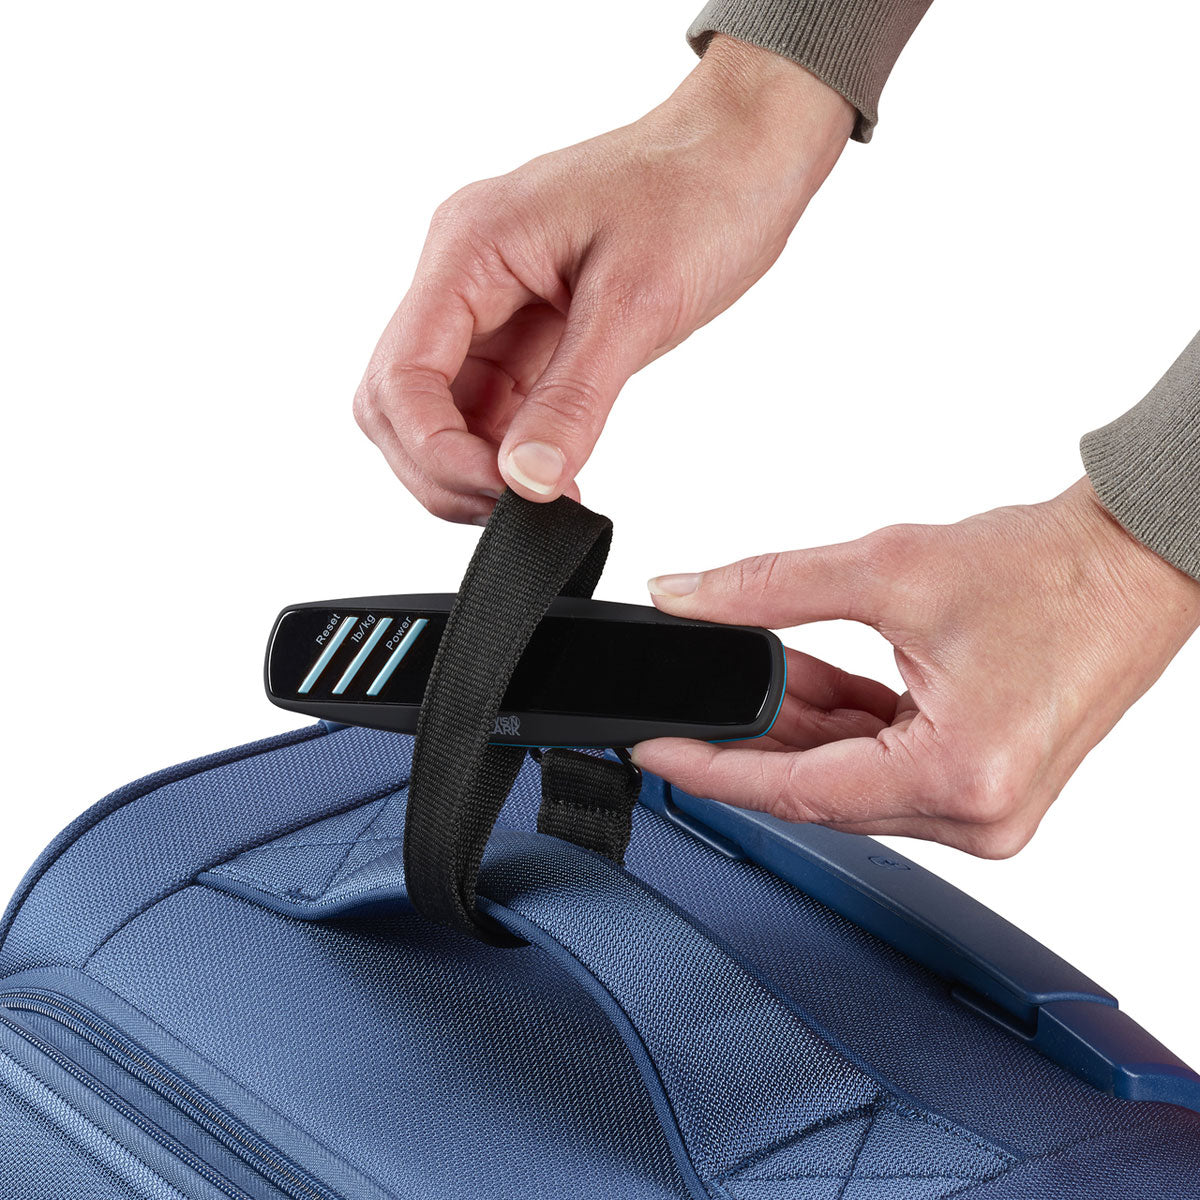 Portable Digital Luggage Scale with Free Battery - up to 90lbs